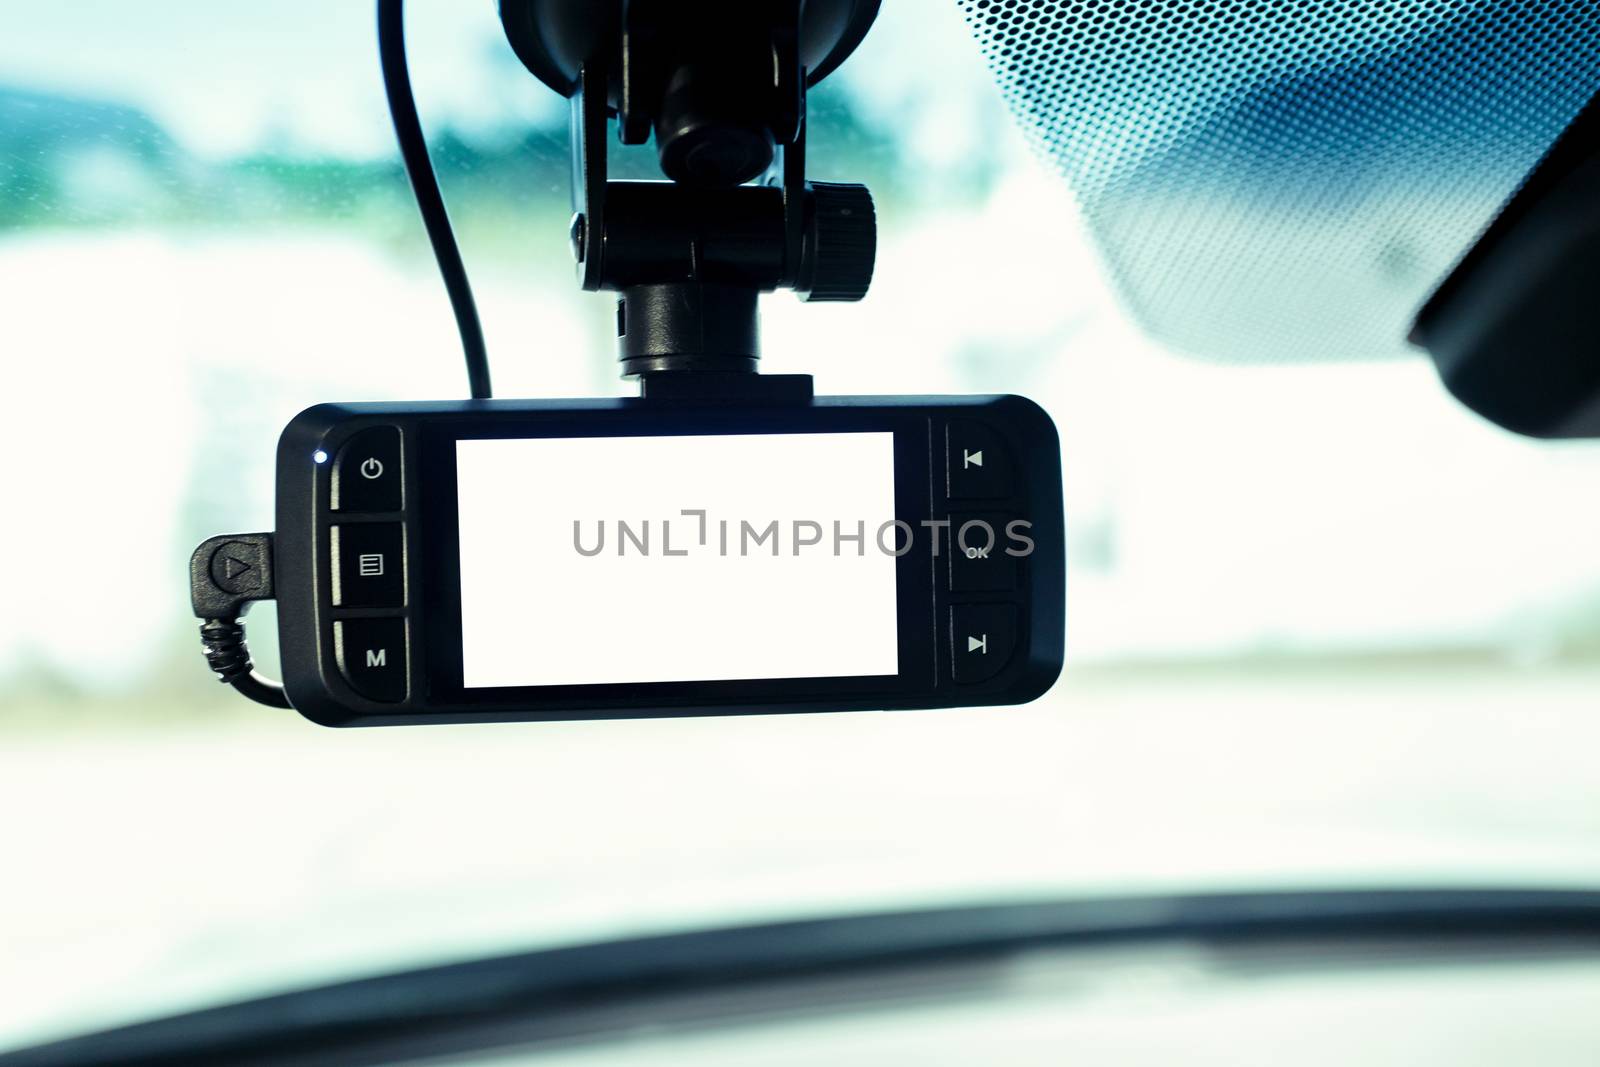 dashcam or car camera mounted on front windshield to record situation or accident ahead, selective focus